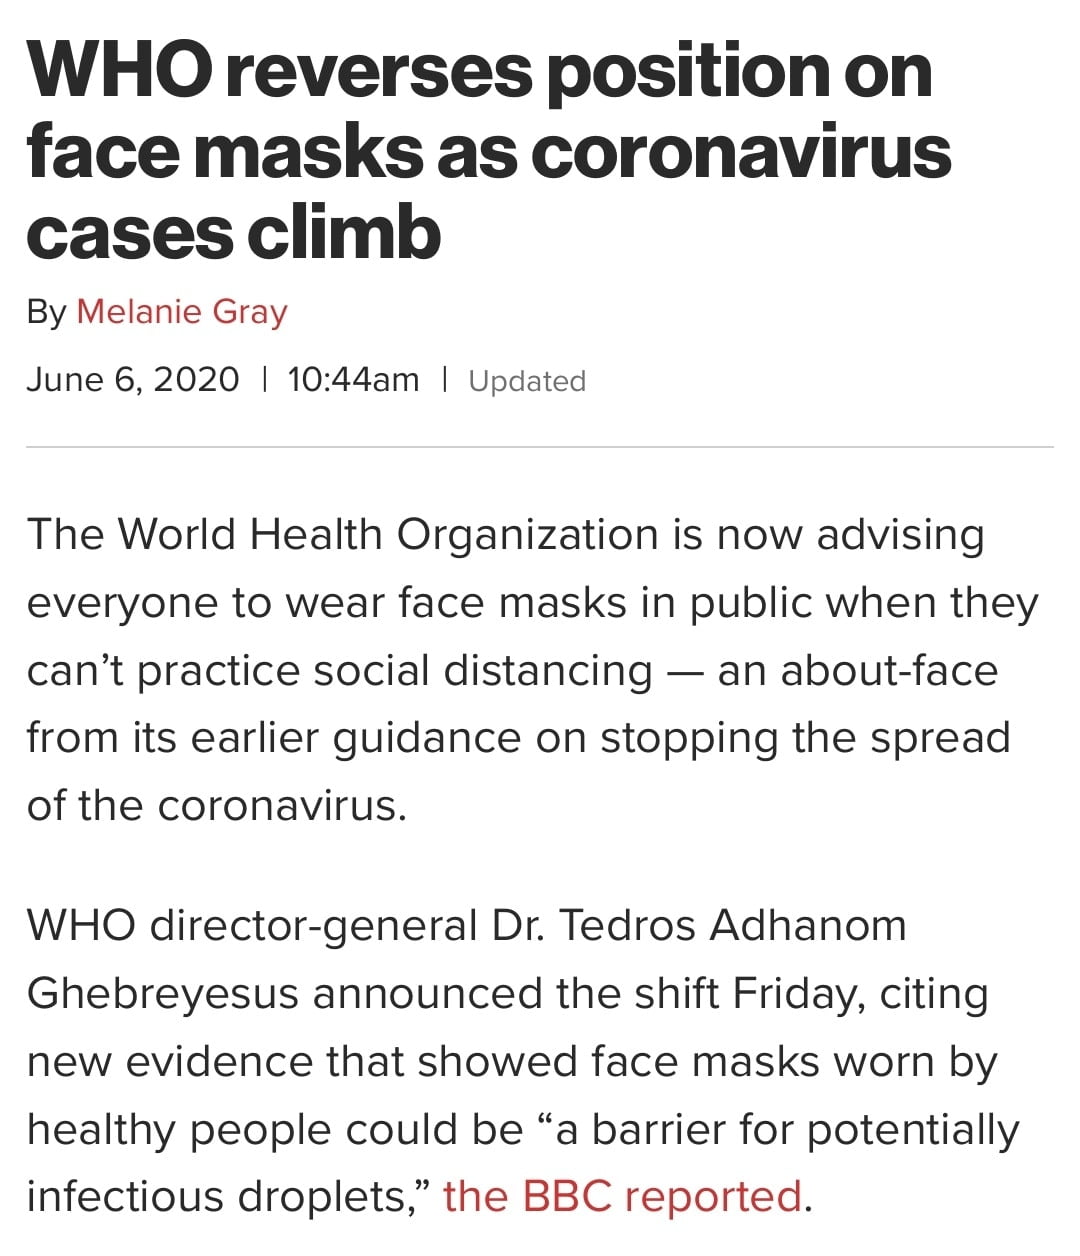 The "experts" at WHO finally agree that masks reduce...